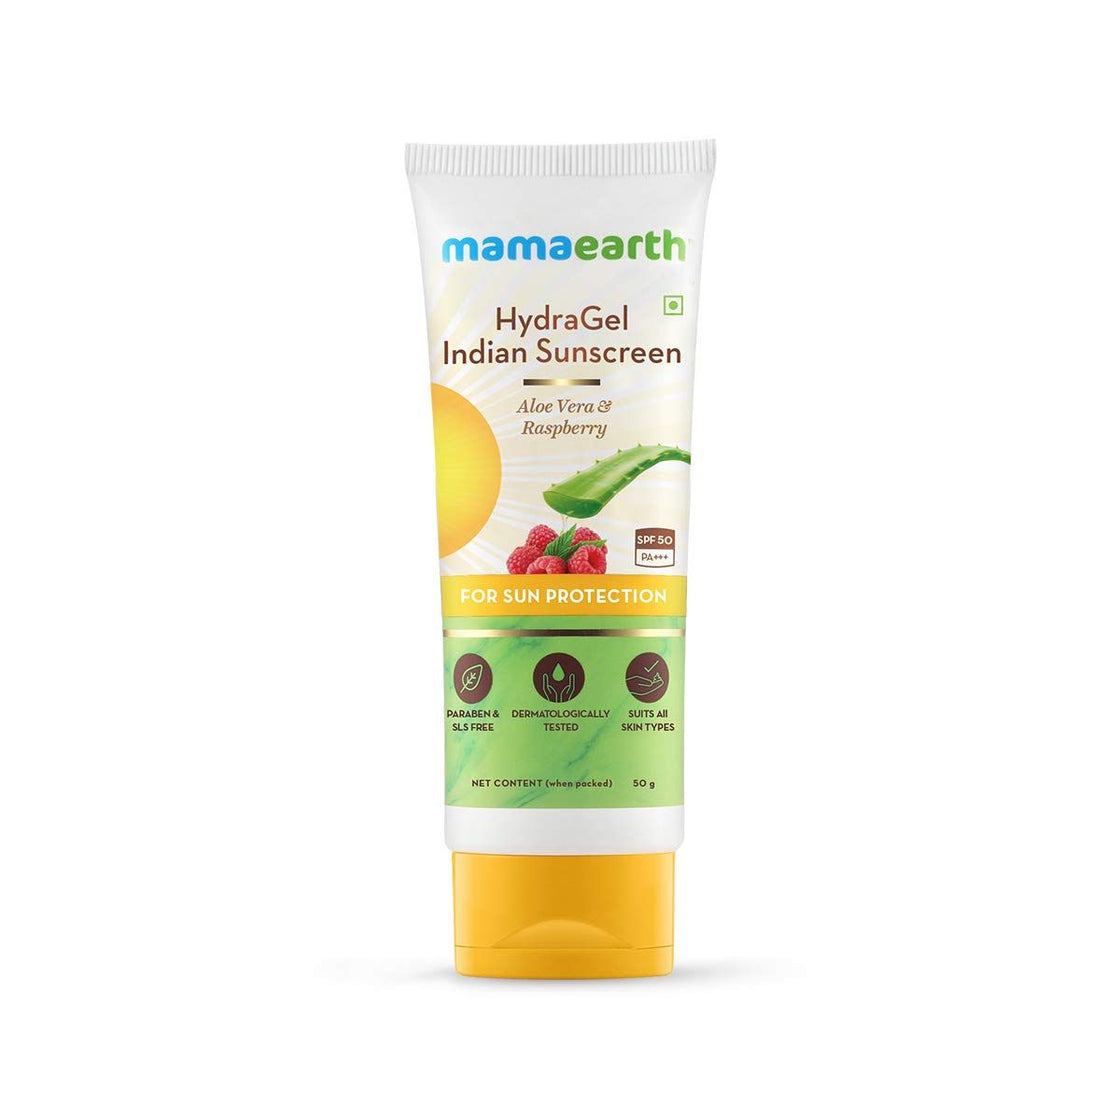 Mamaearth Hydragel Indian Sunscreen Spf 50, With Aloe Vera & Raspberry, For Sun Protection